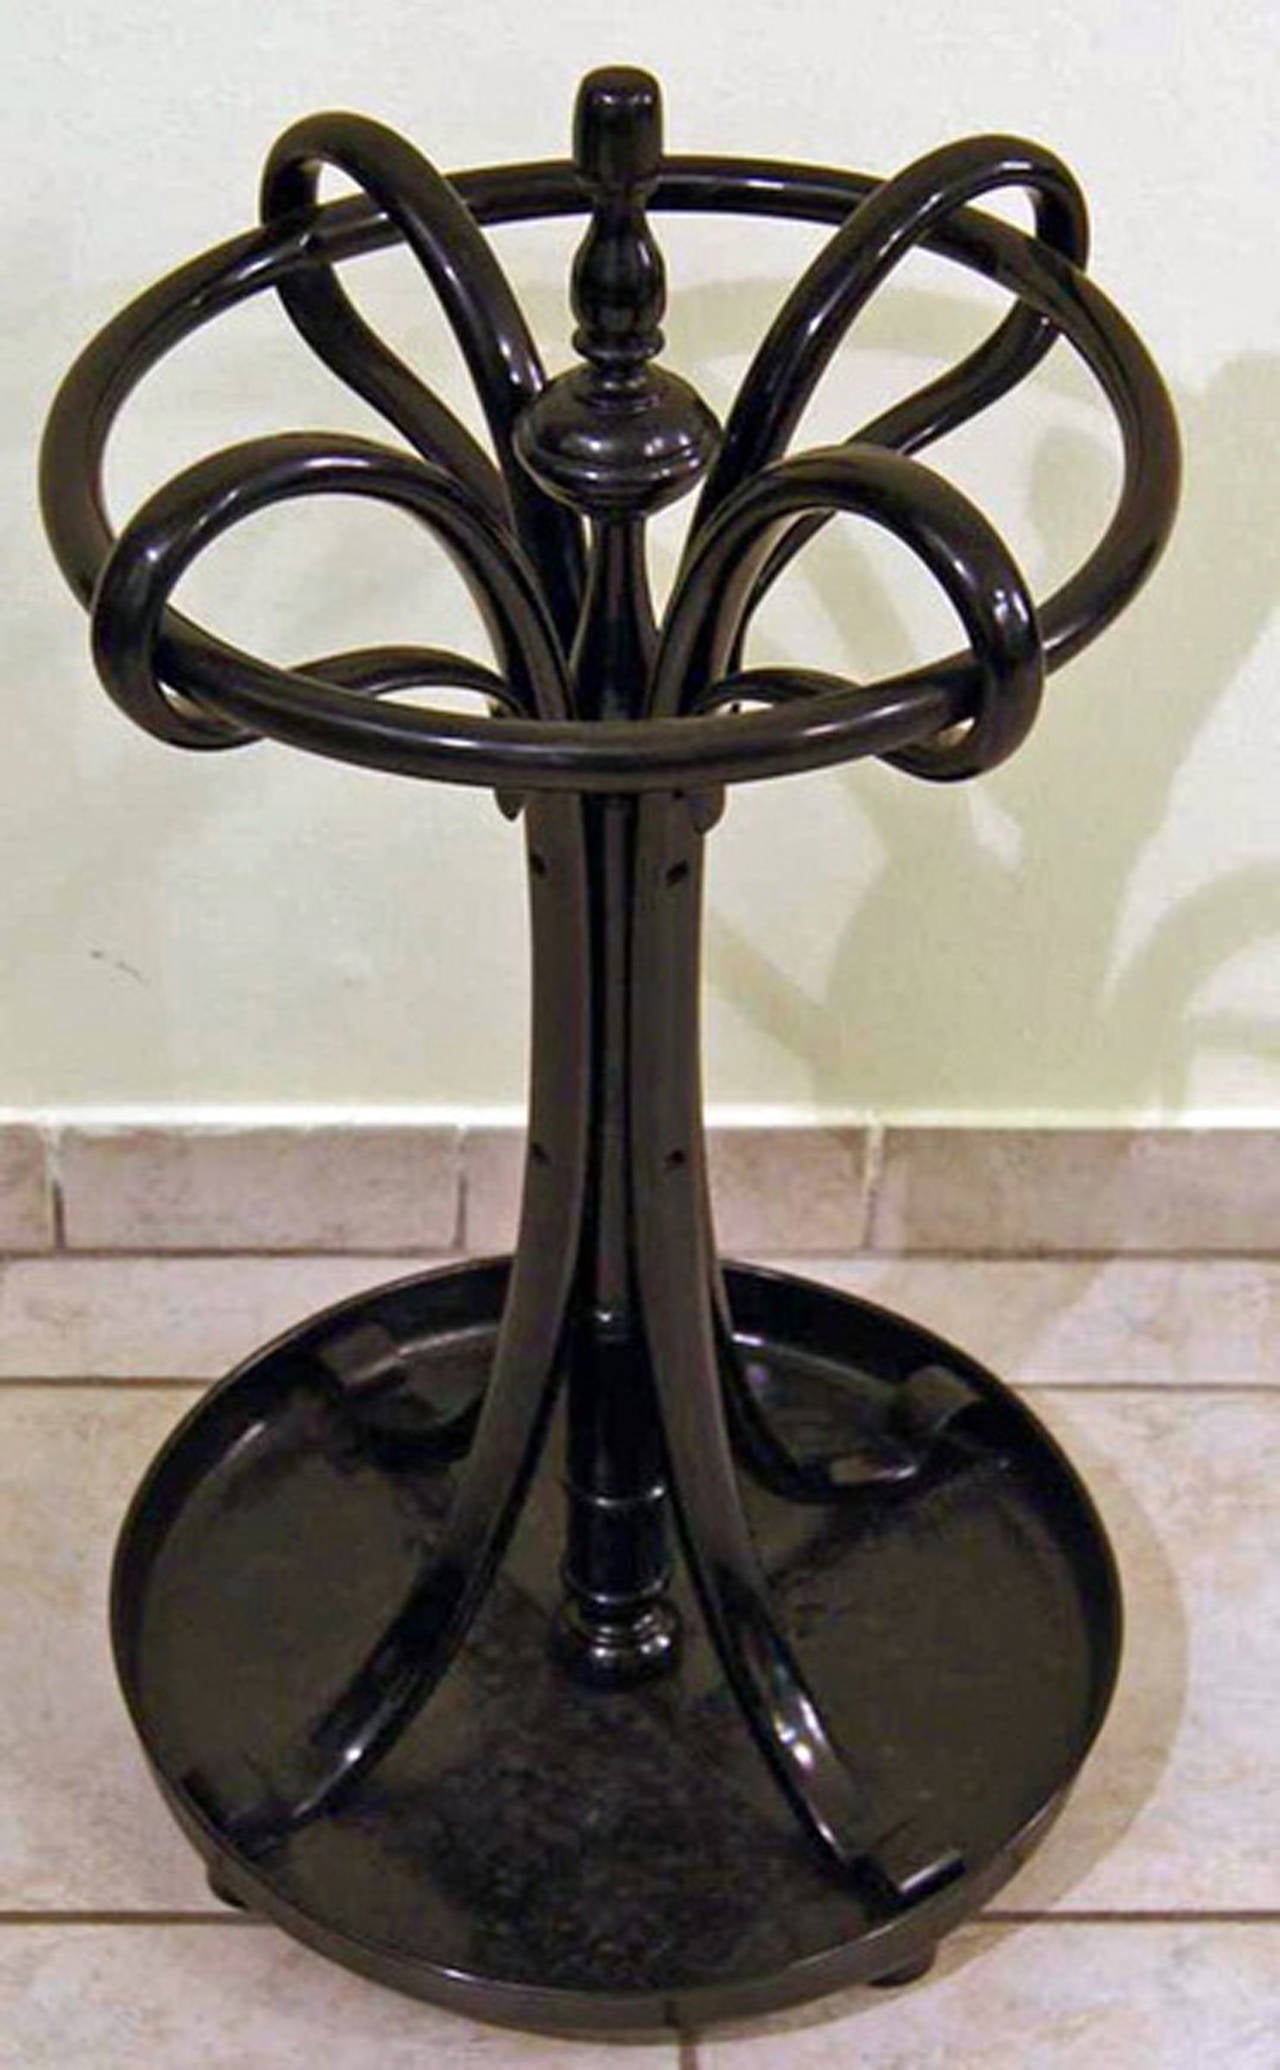 Thonet round support for umbrellas (umbrella stand)  / number 1

beech wood ,  black stained  /  high quality handwork 
This nicest accessory for antechamber is stunningly shaped, indeed  (the wooden parts are amazingly bent in finest Thonet